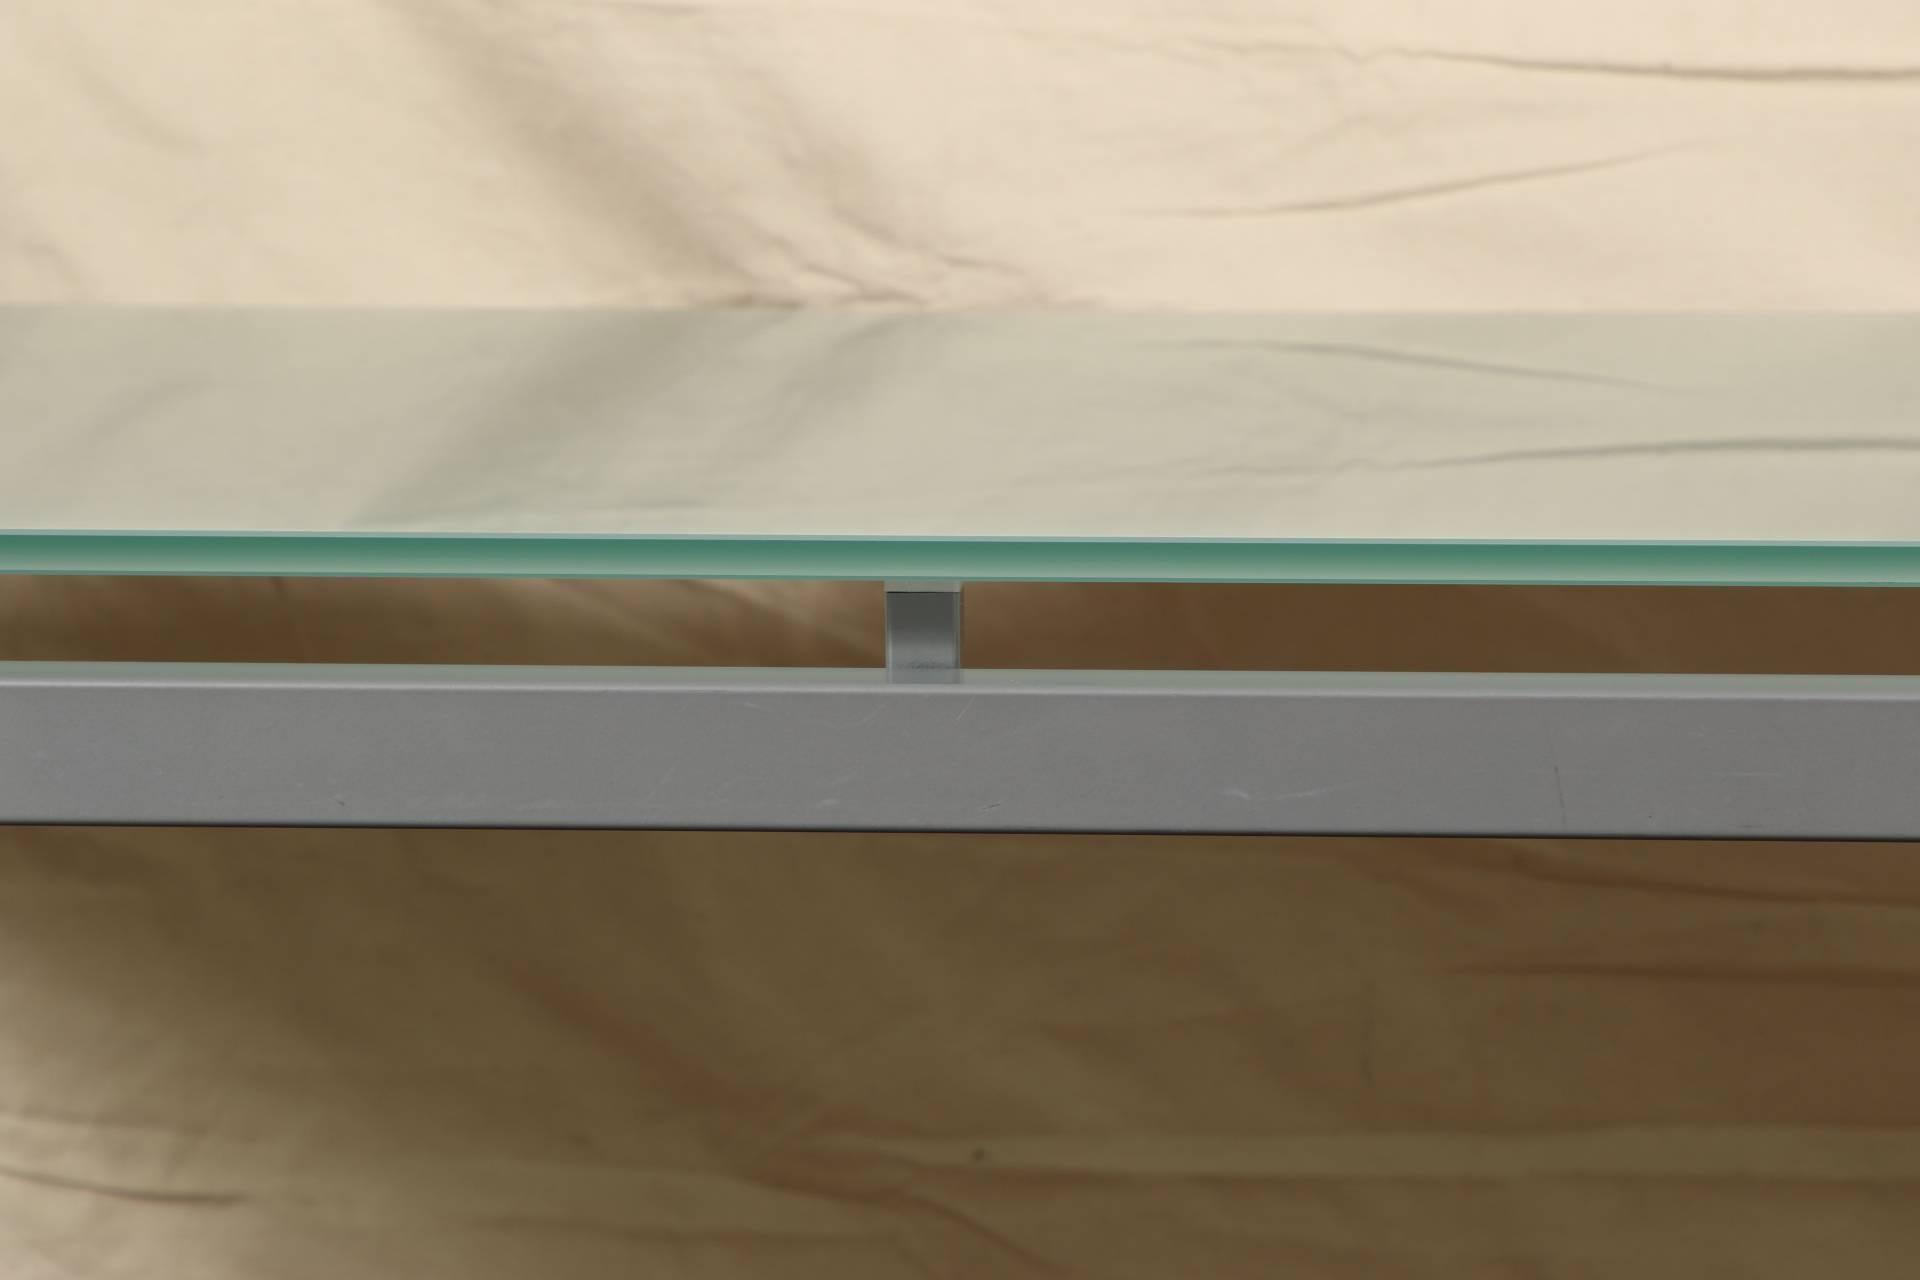 Rectangular brushed chrome frame with raised supports for the frosted green glass top on the reverse.
Measure: Glass is 1/2 inch thick.
Some very light scratches to glass top, does not detract from the table.